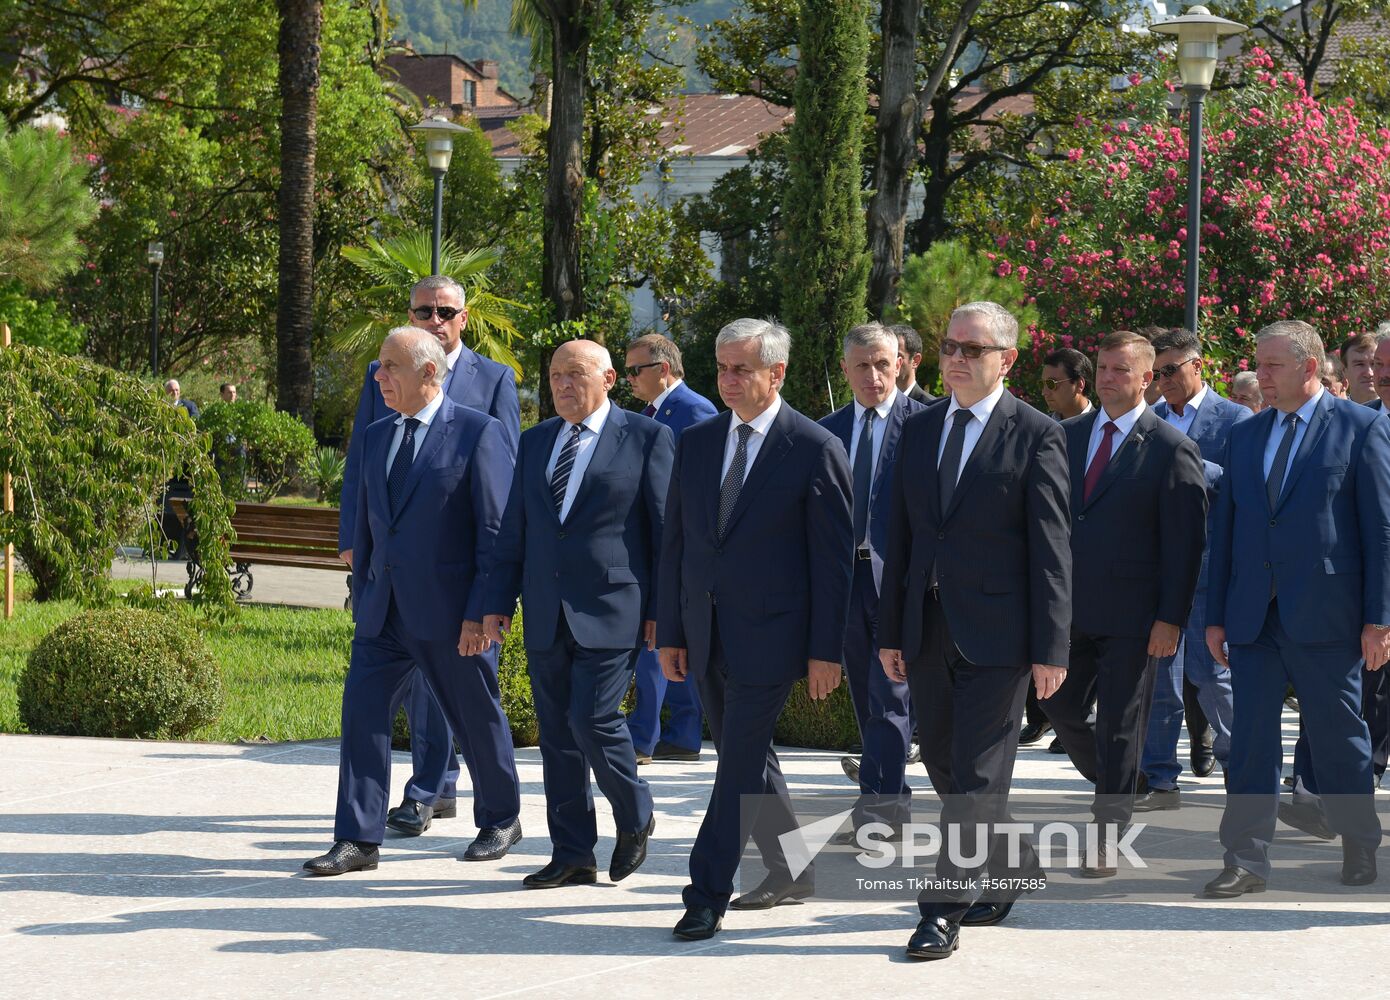 Celebration of 10th anniversary of Russia's recognition of Abkhazia's independence